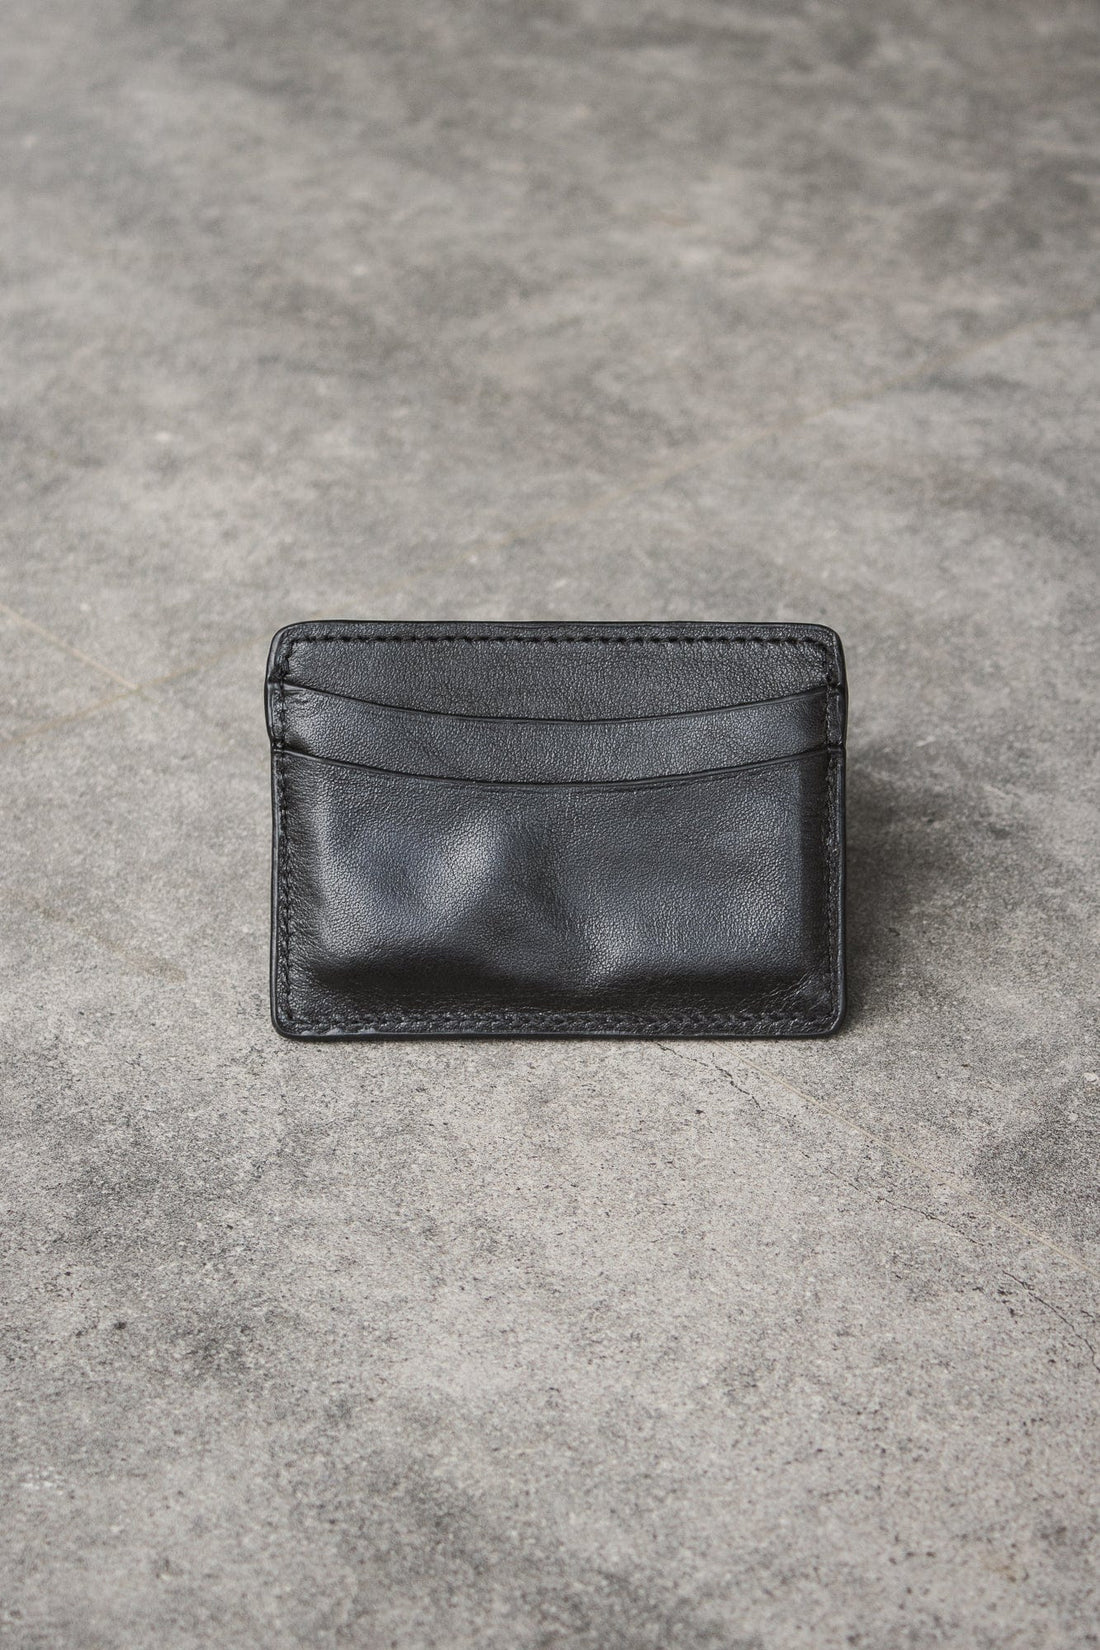 MANDRN | The Cardholder Luxe - Black Leather Wallet